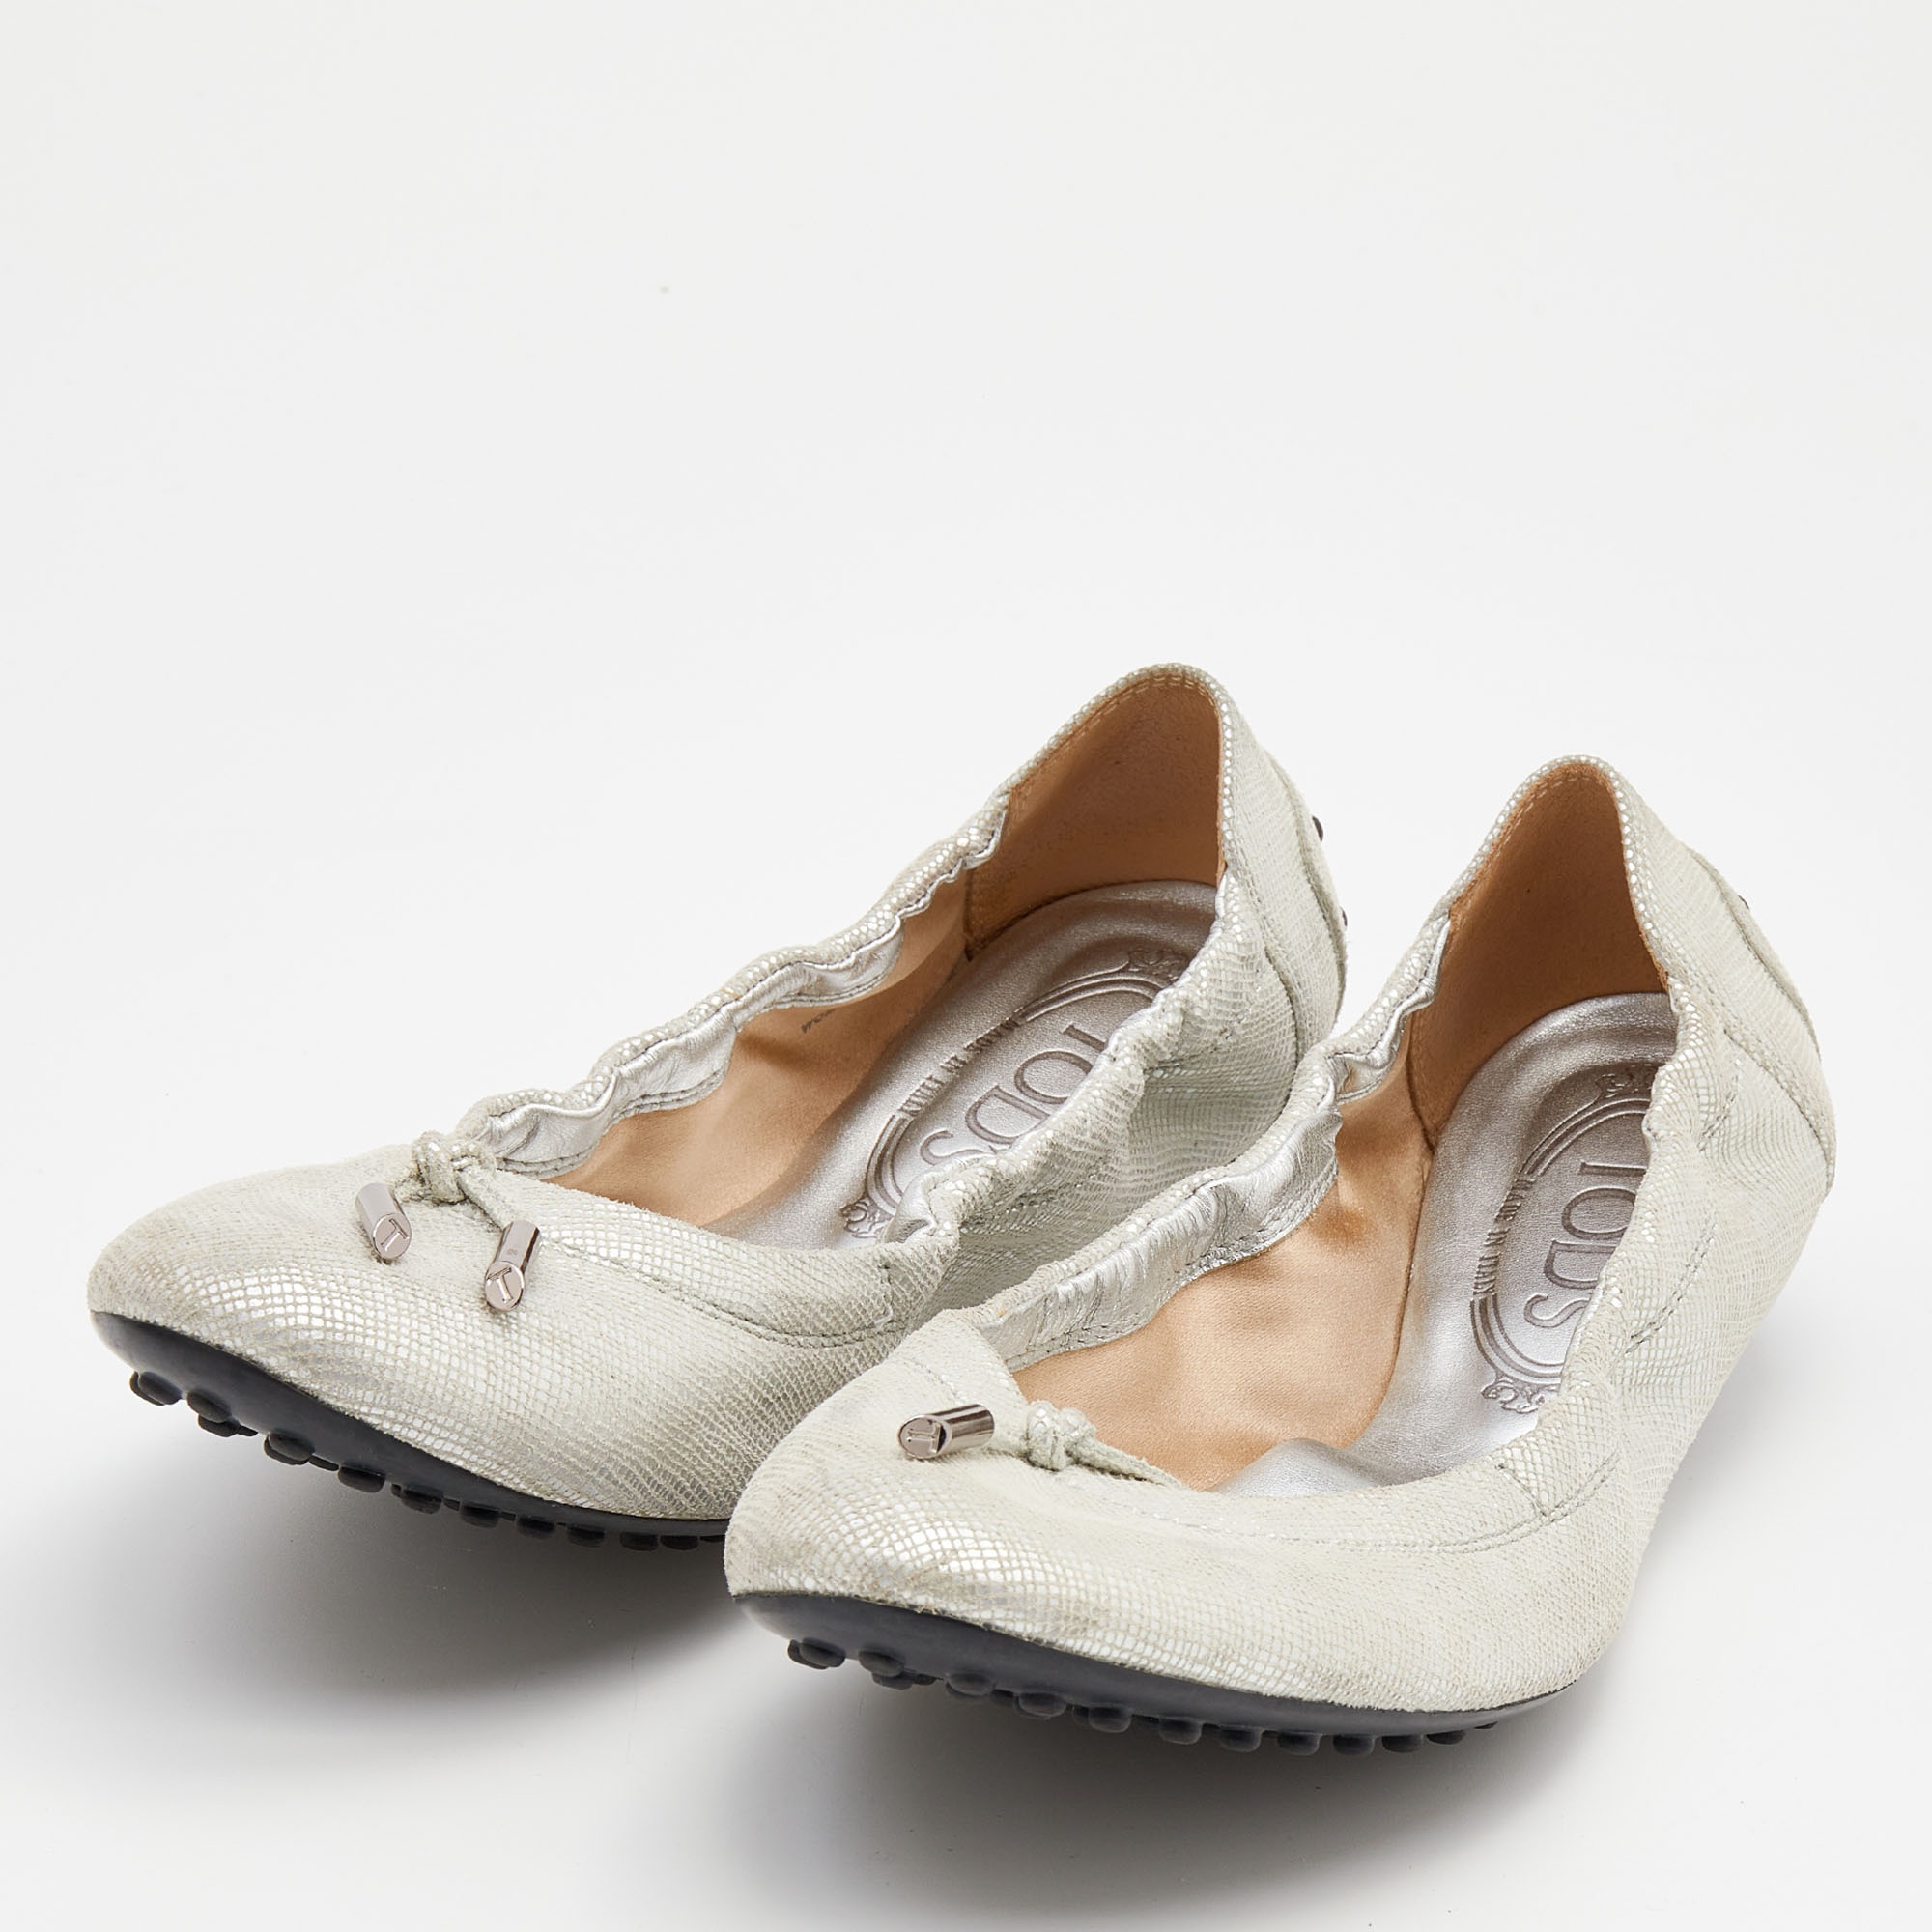 

Tod's Silver Textured Nubuck Leather Bow Scrunch Ballet Flats Size